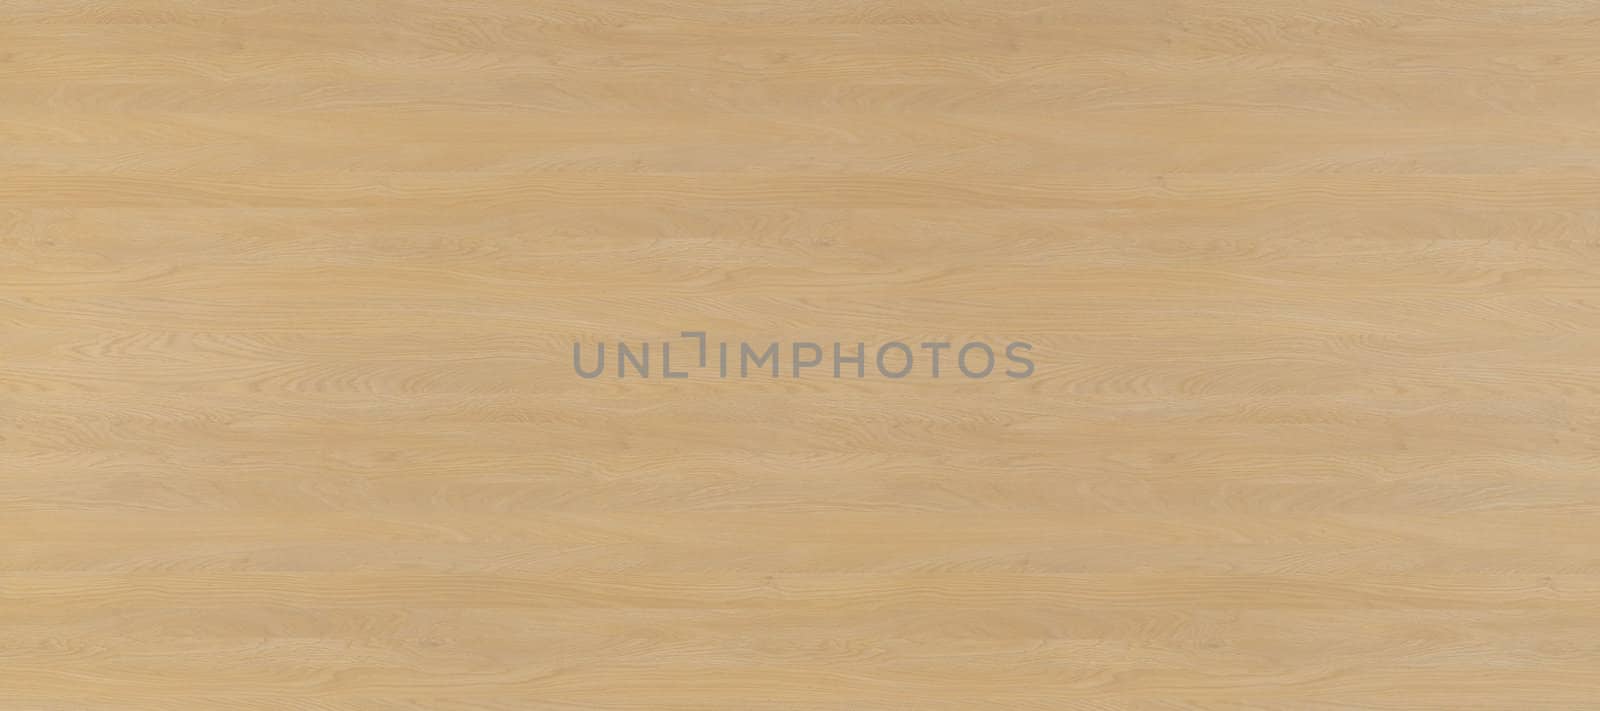 Large grainy wood background or texture by Baltus